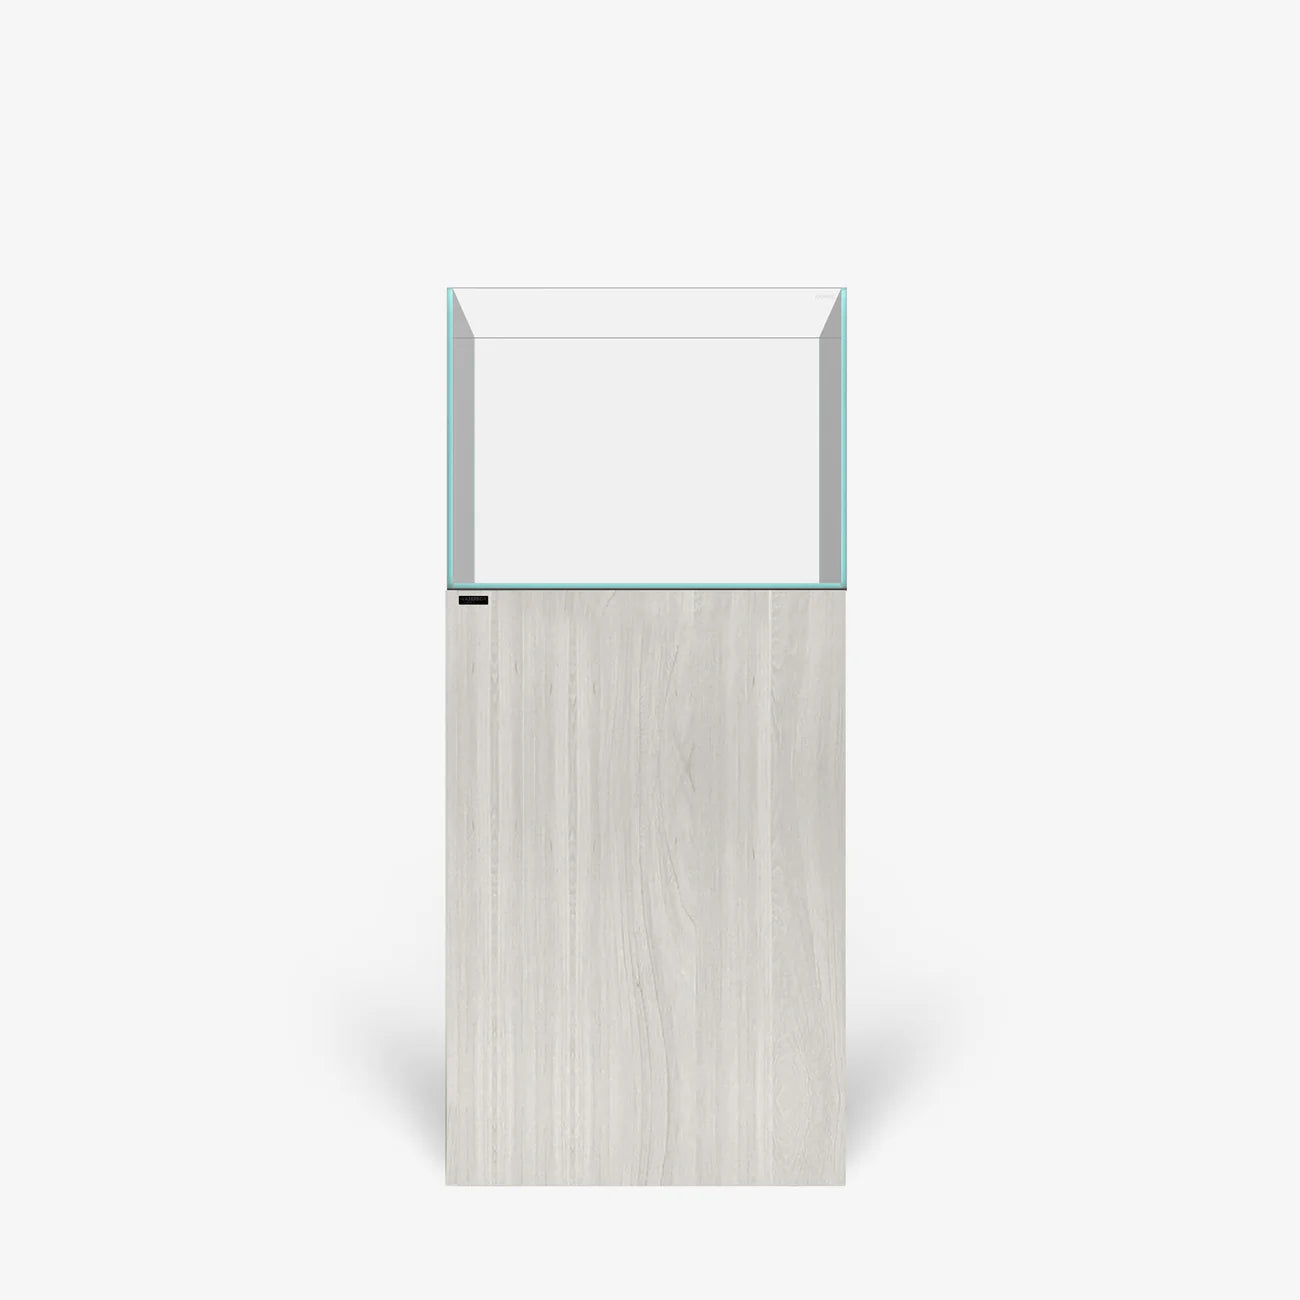 WaterBox CLEAR Series